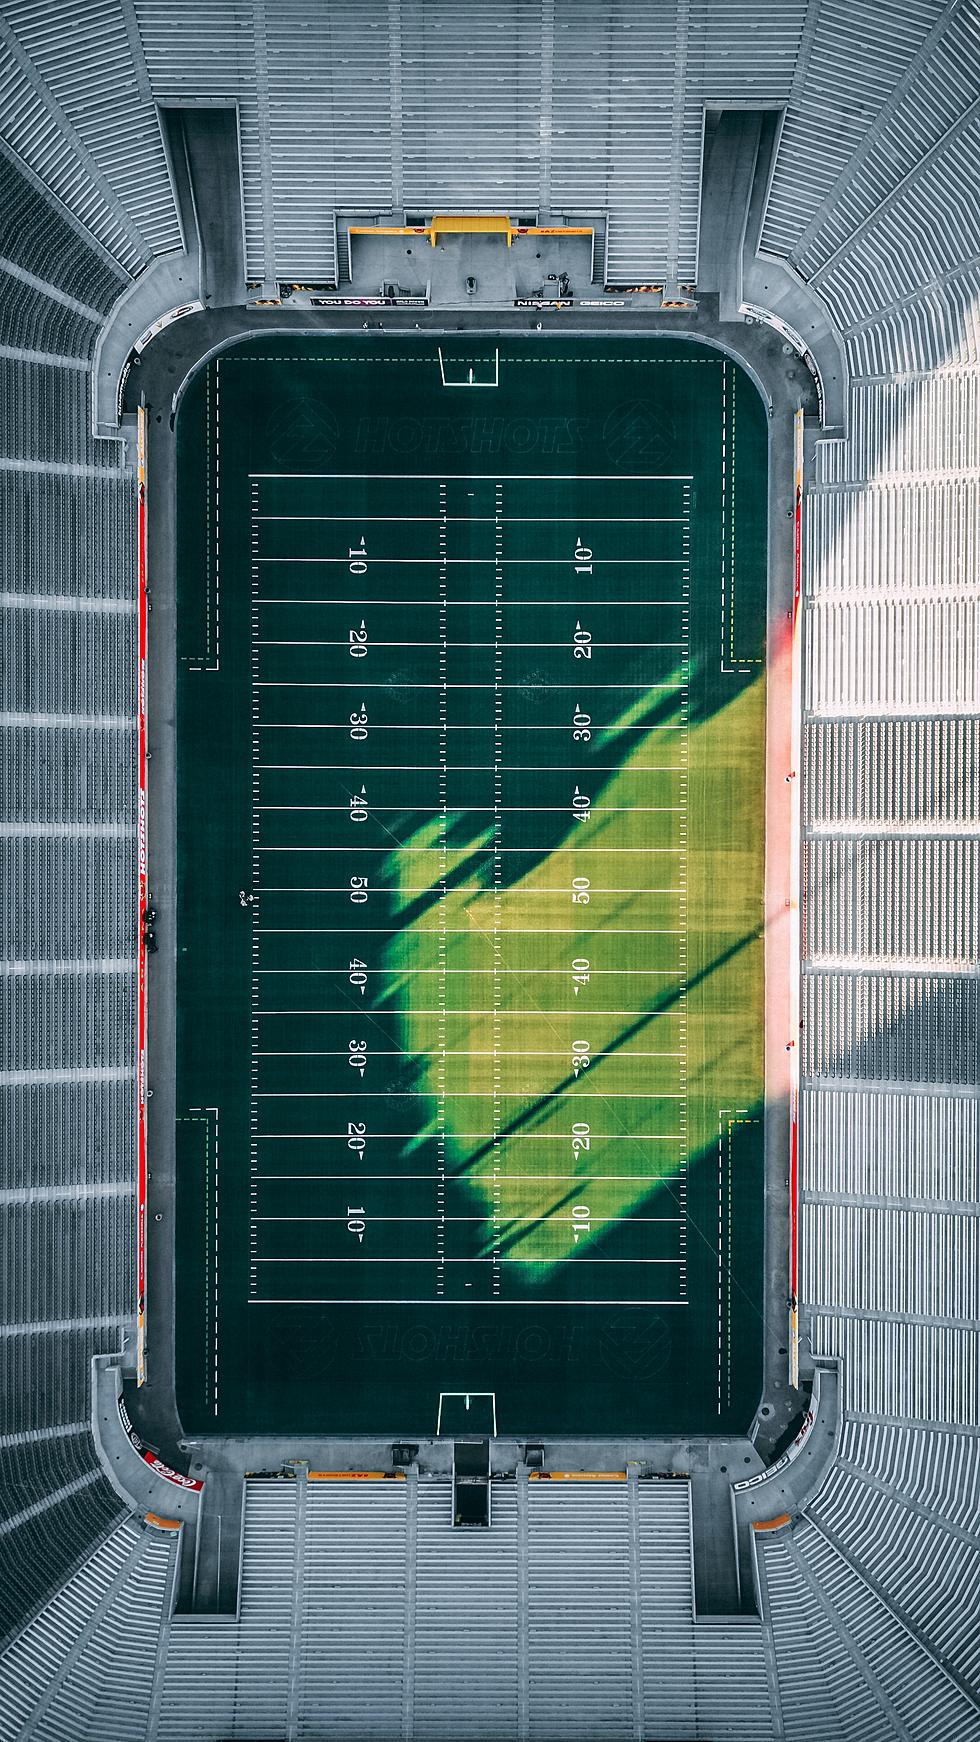 VIDEO: Montana&#8217;s Bobcat Stadium From Above. Looks Pretty Awesome